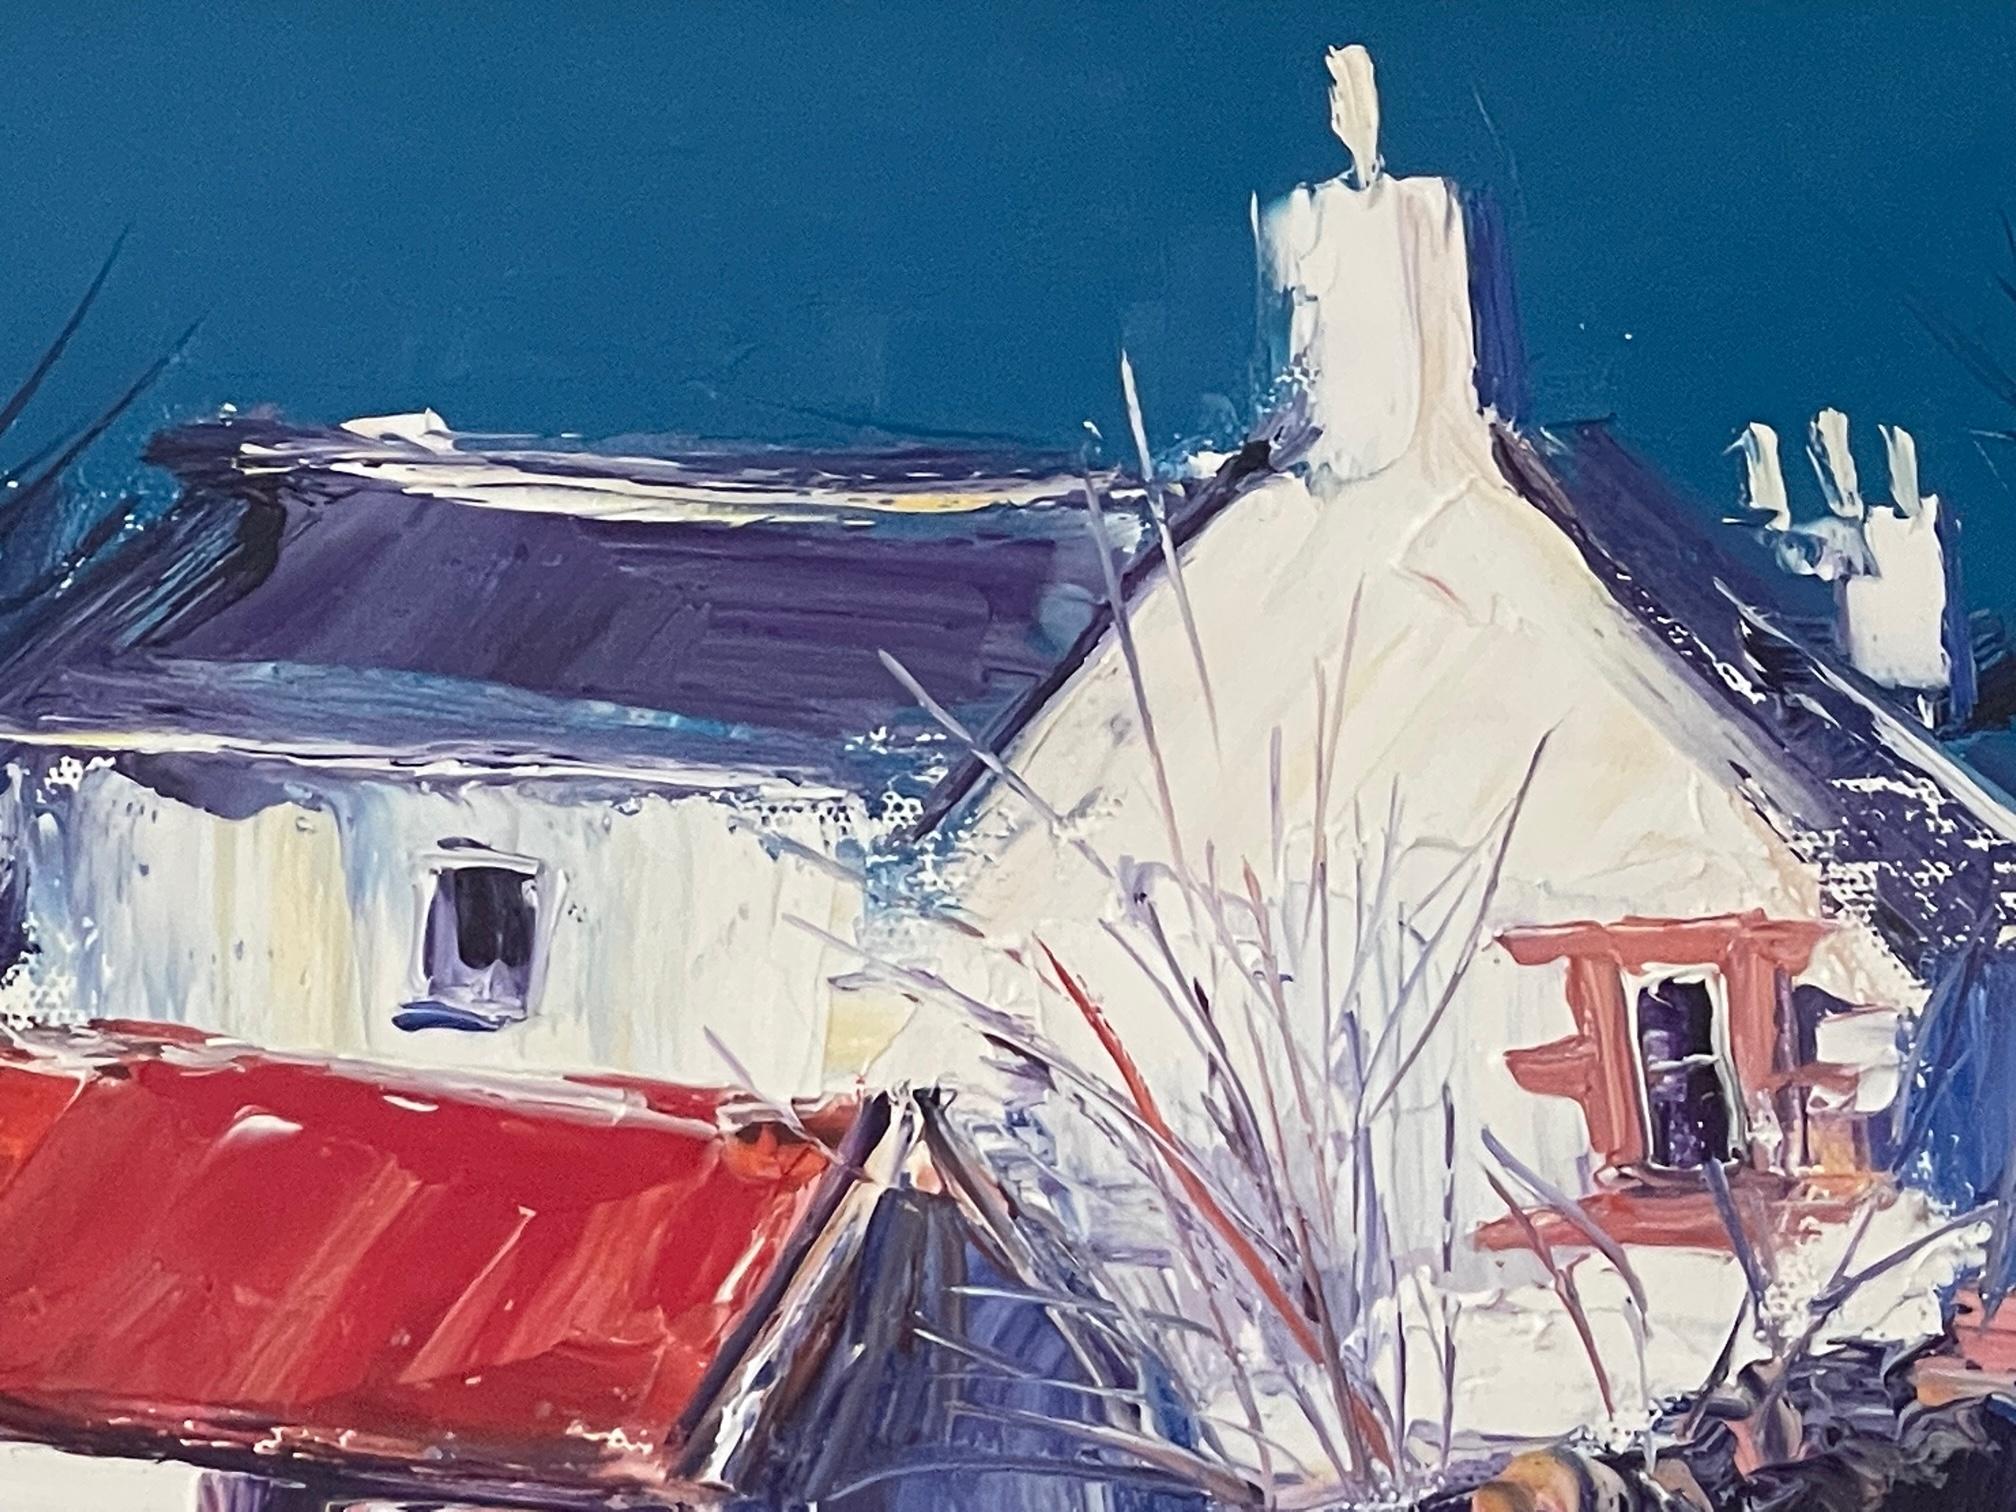 Contemporary acrylic painting on canvas by sought after and beloved Scottish artist Jolomo, (John Lowrie Morrison, 1941 -), this painting is signed and dated 2005 by the artist. The title 'Evening Light', location and date are handwritten verso, and